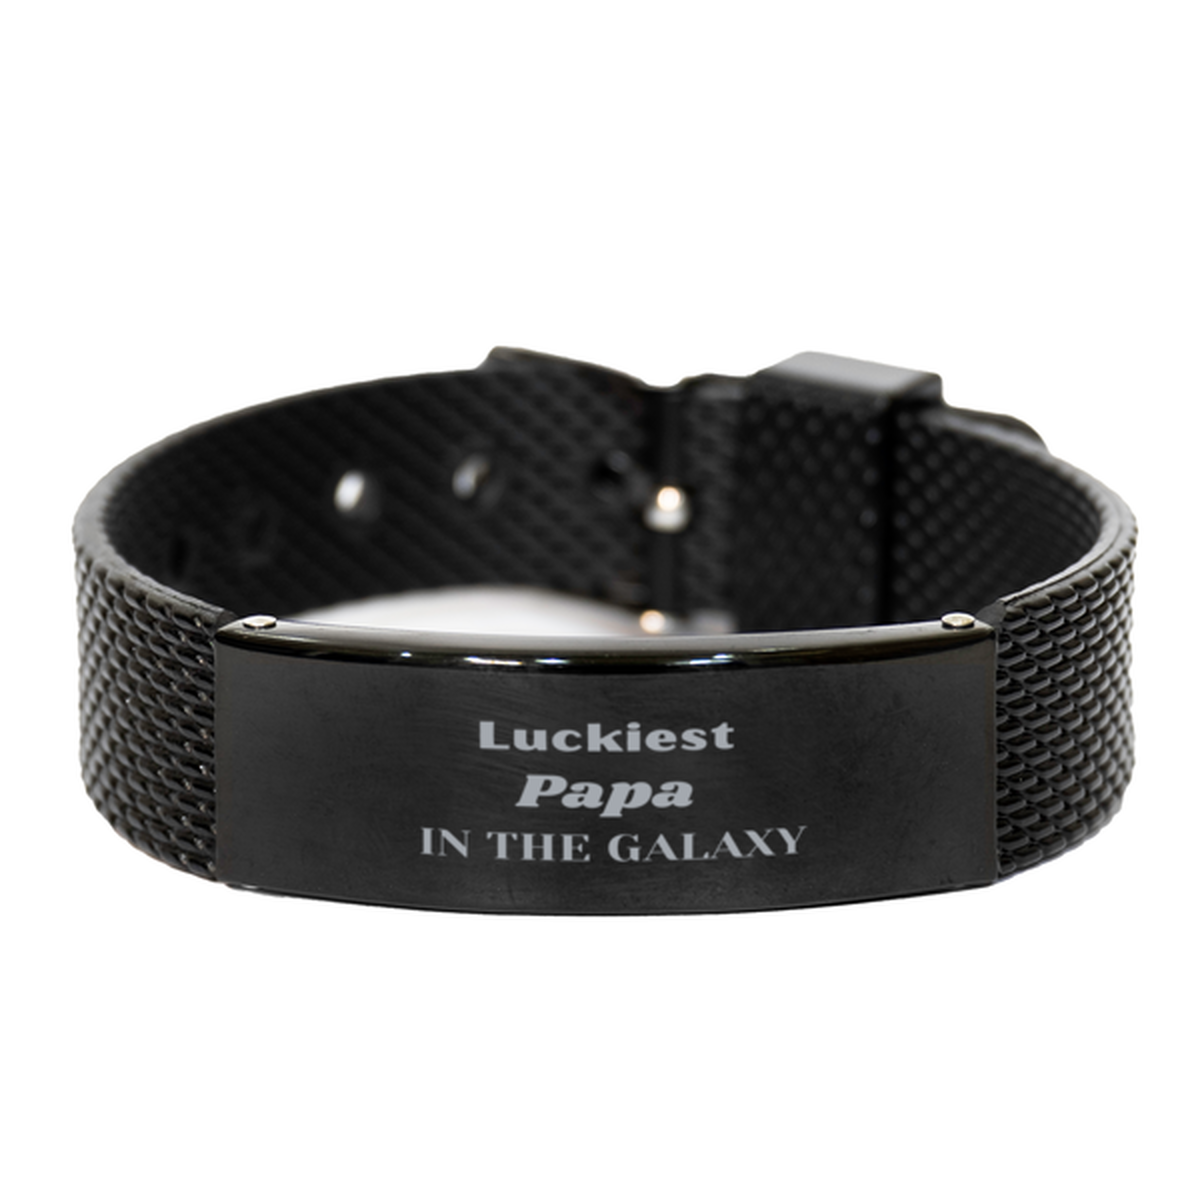 Luckiest Papa in the Galaxy, To My Papa Engraved Gifts, Christmas Papa Black Shark Mesh Bracelet Gifts, X-mas Birthday Unique Gifts For Papa Men Women